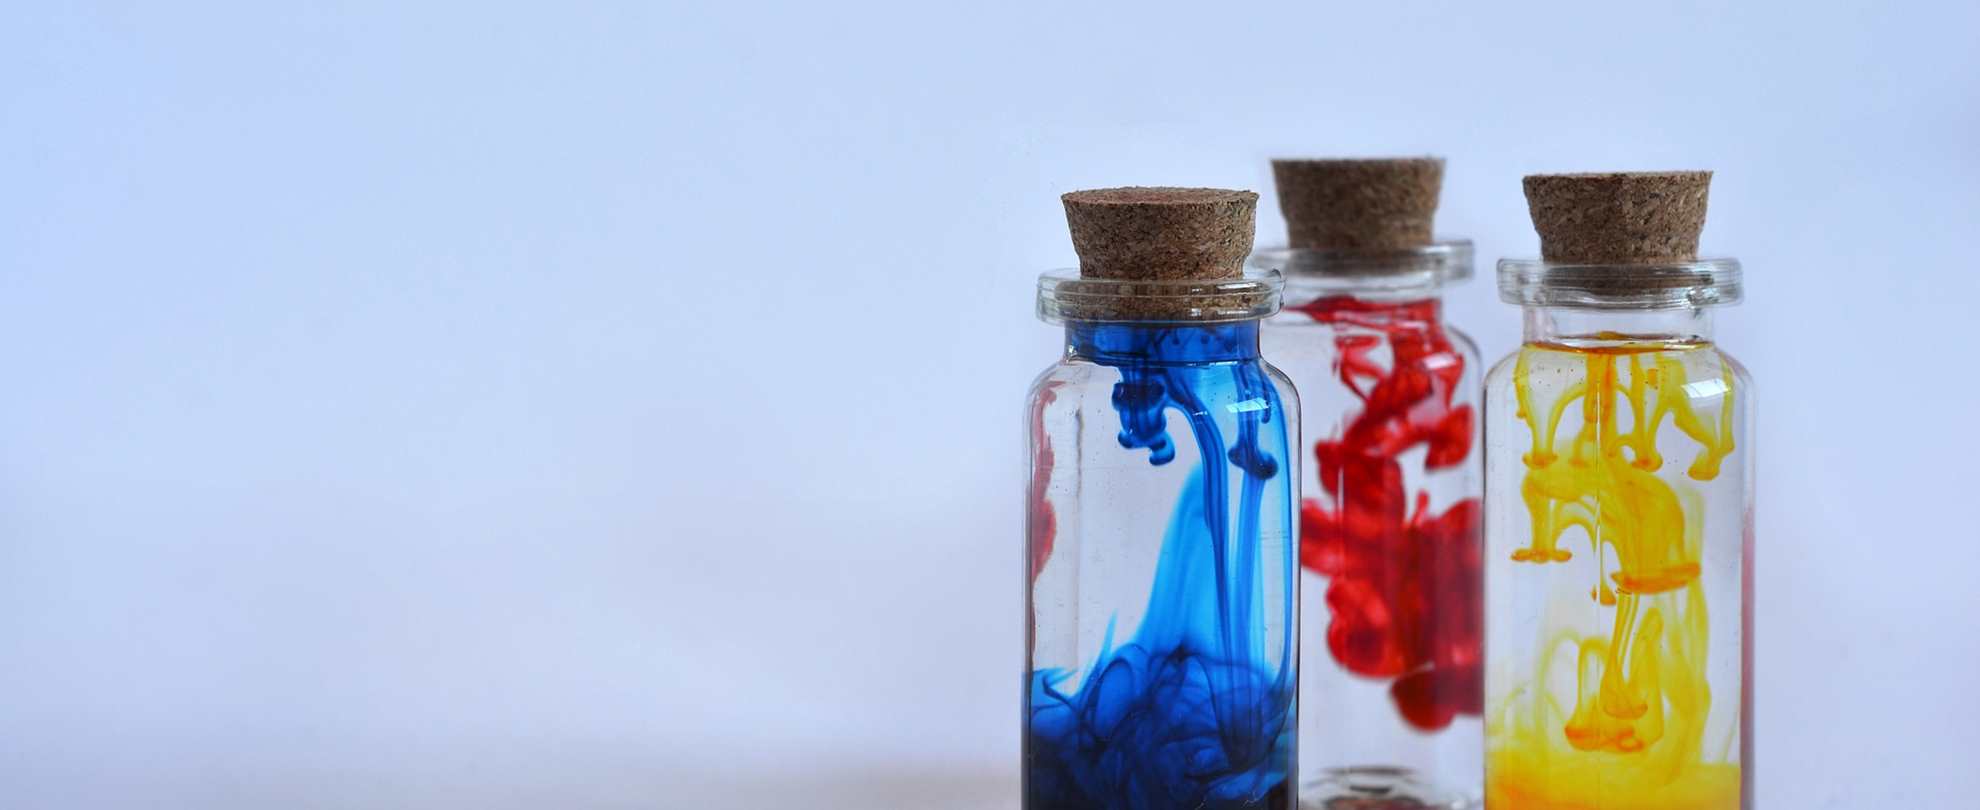 photo of 3 glass jars with blue yellow and red ink